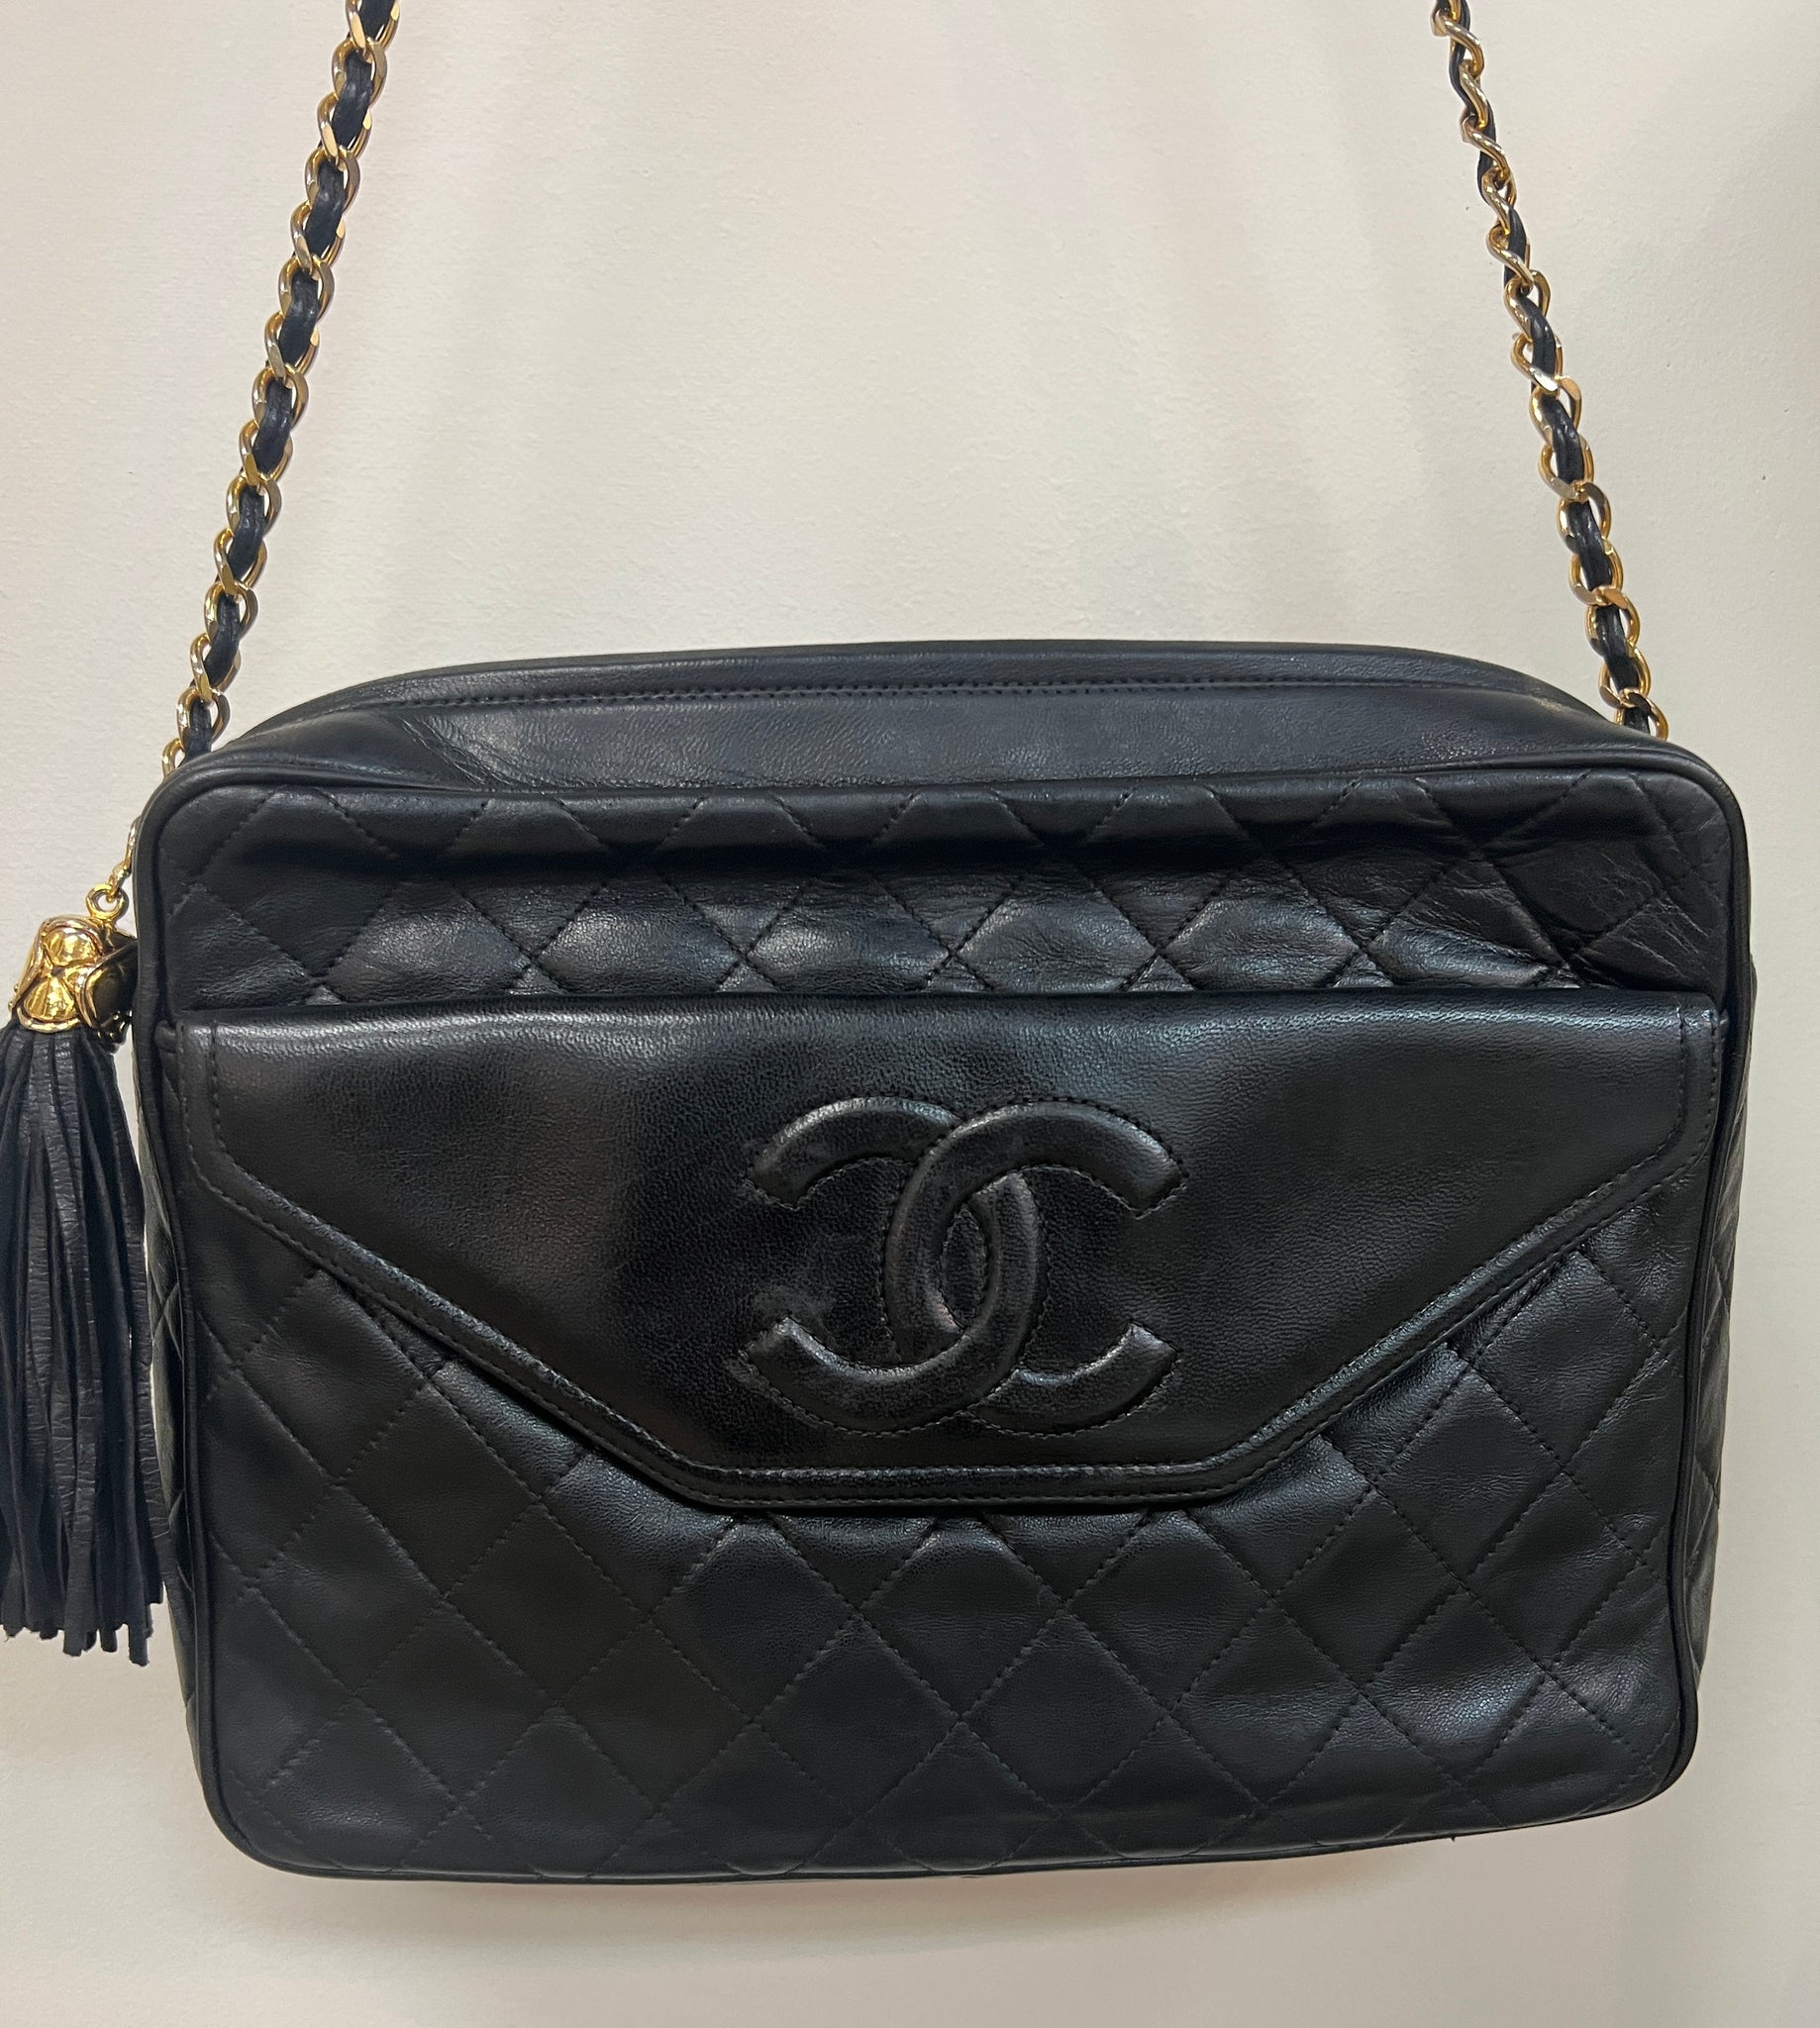 How to Tell if a Chanel Bag is Fake | ZenMarket